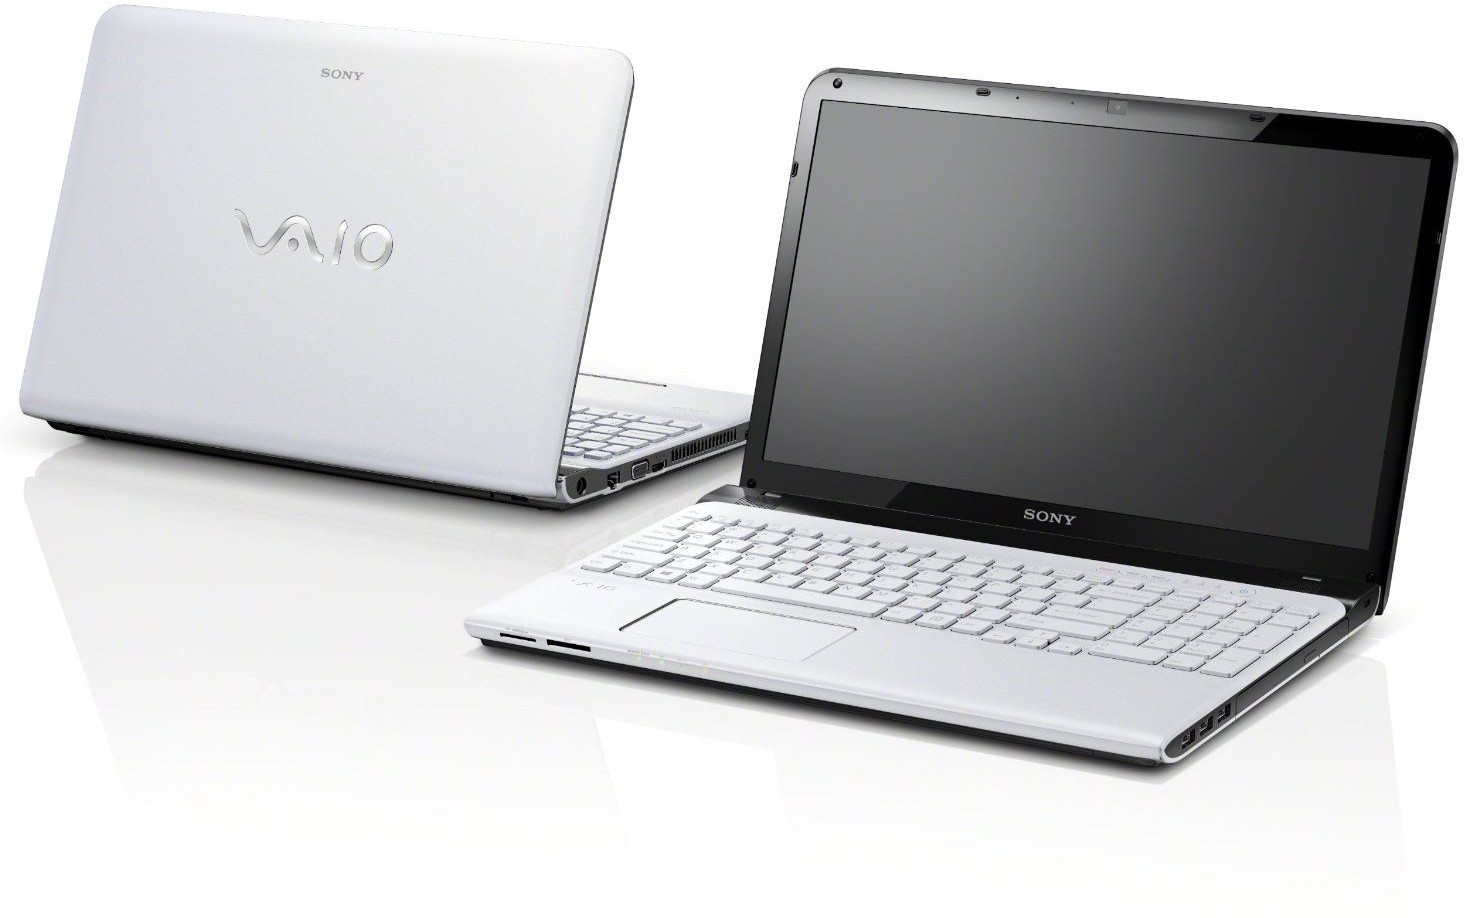 Sony Vaio Pcg-7y2l Drivers Download